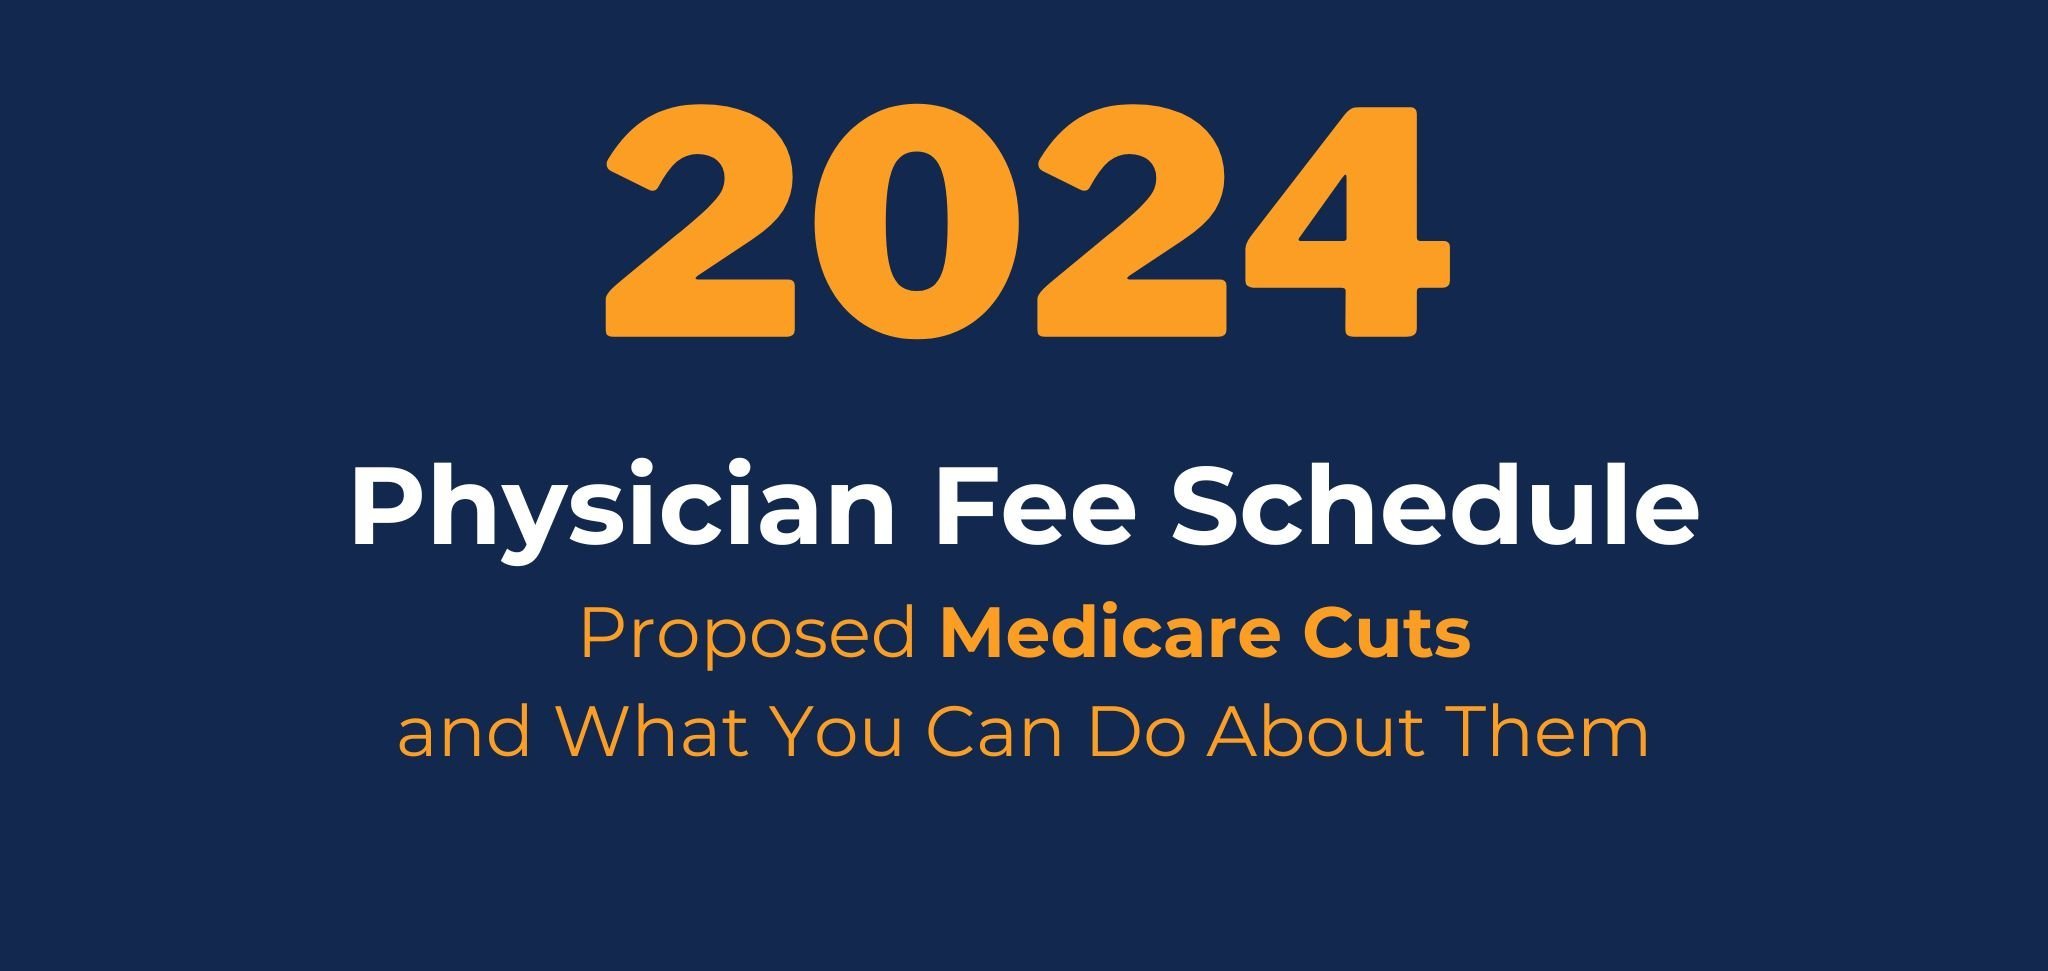 The 2024 Physician Fee Schedule Proposed Rule includes yet another cut to Medicare reimbursements for physical therapy services.